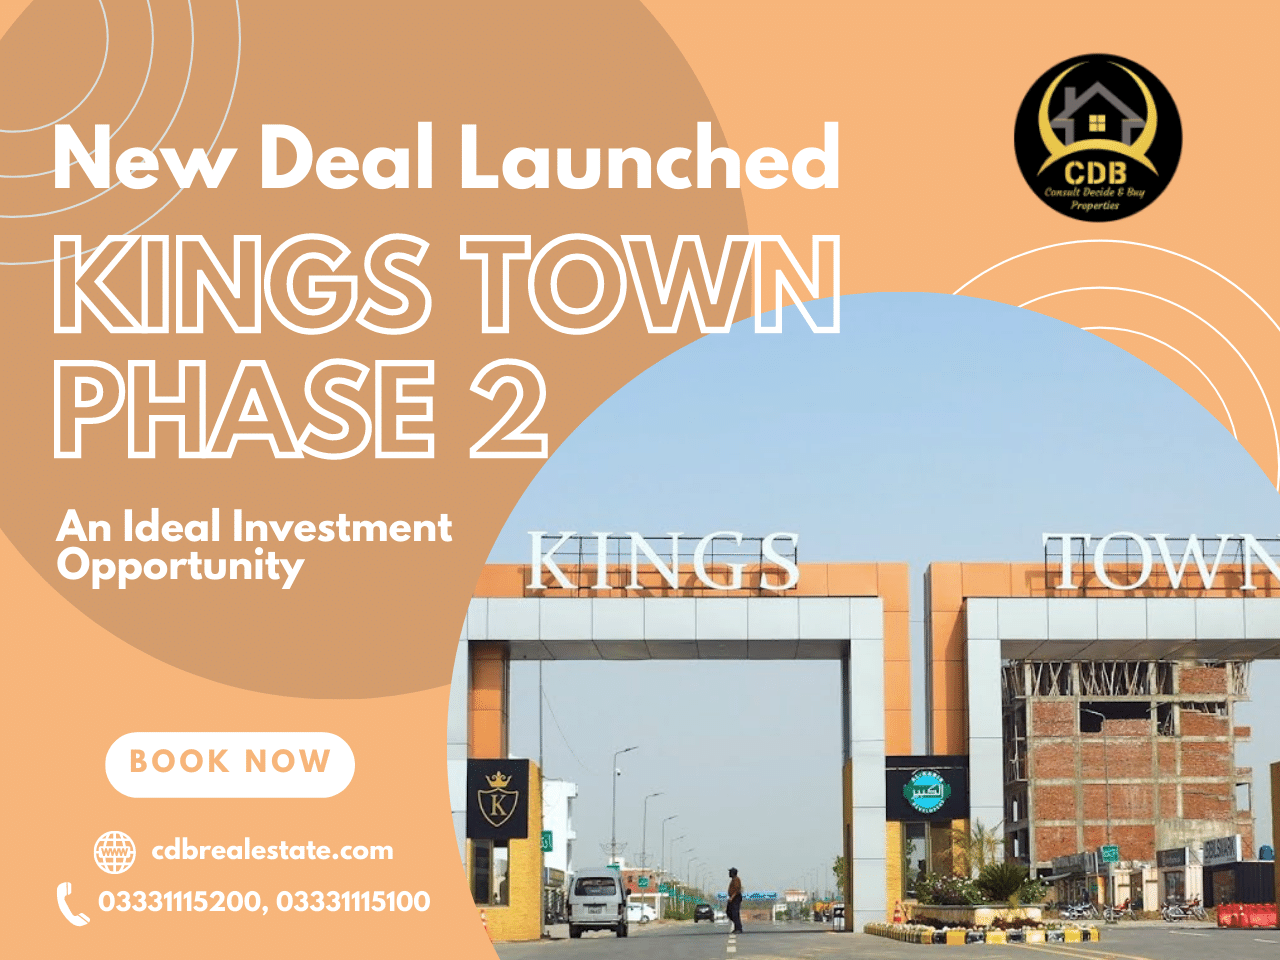 New Deal Launched in Kings Town